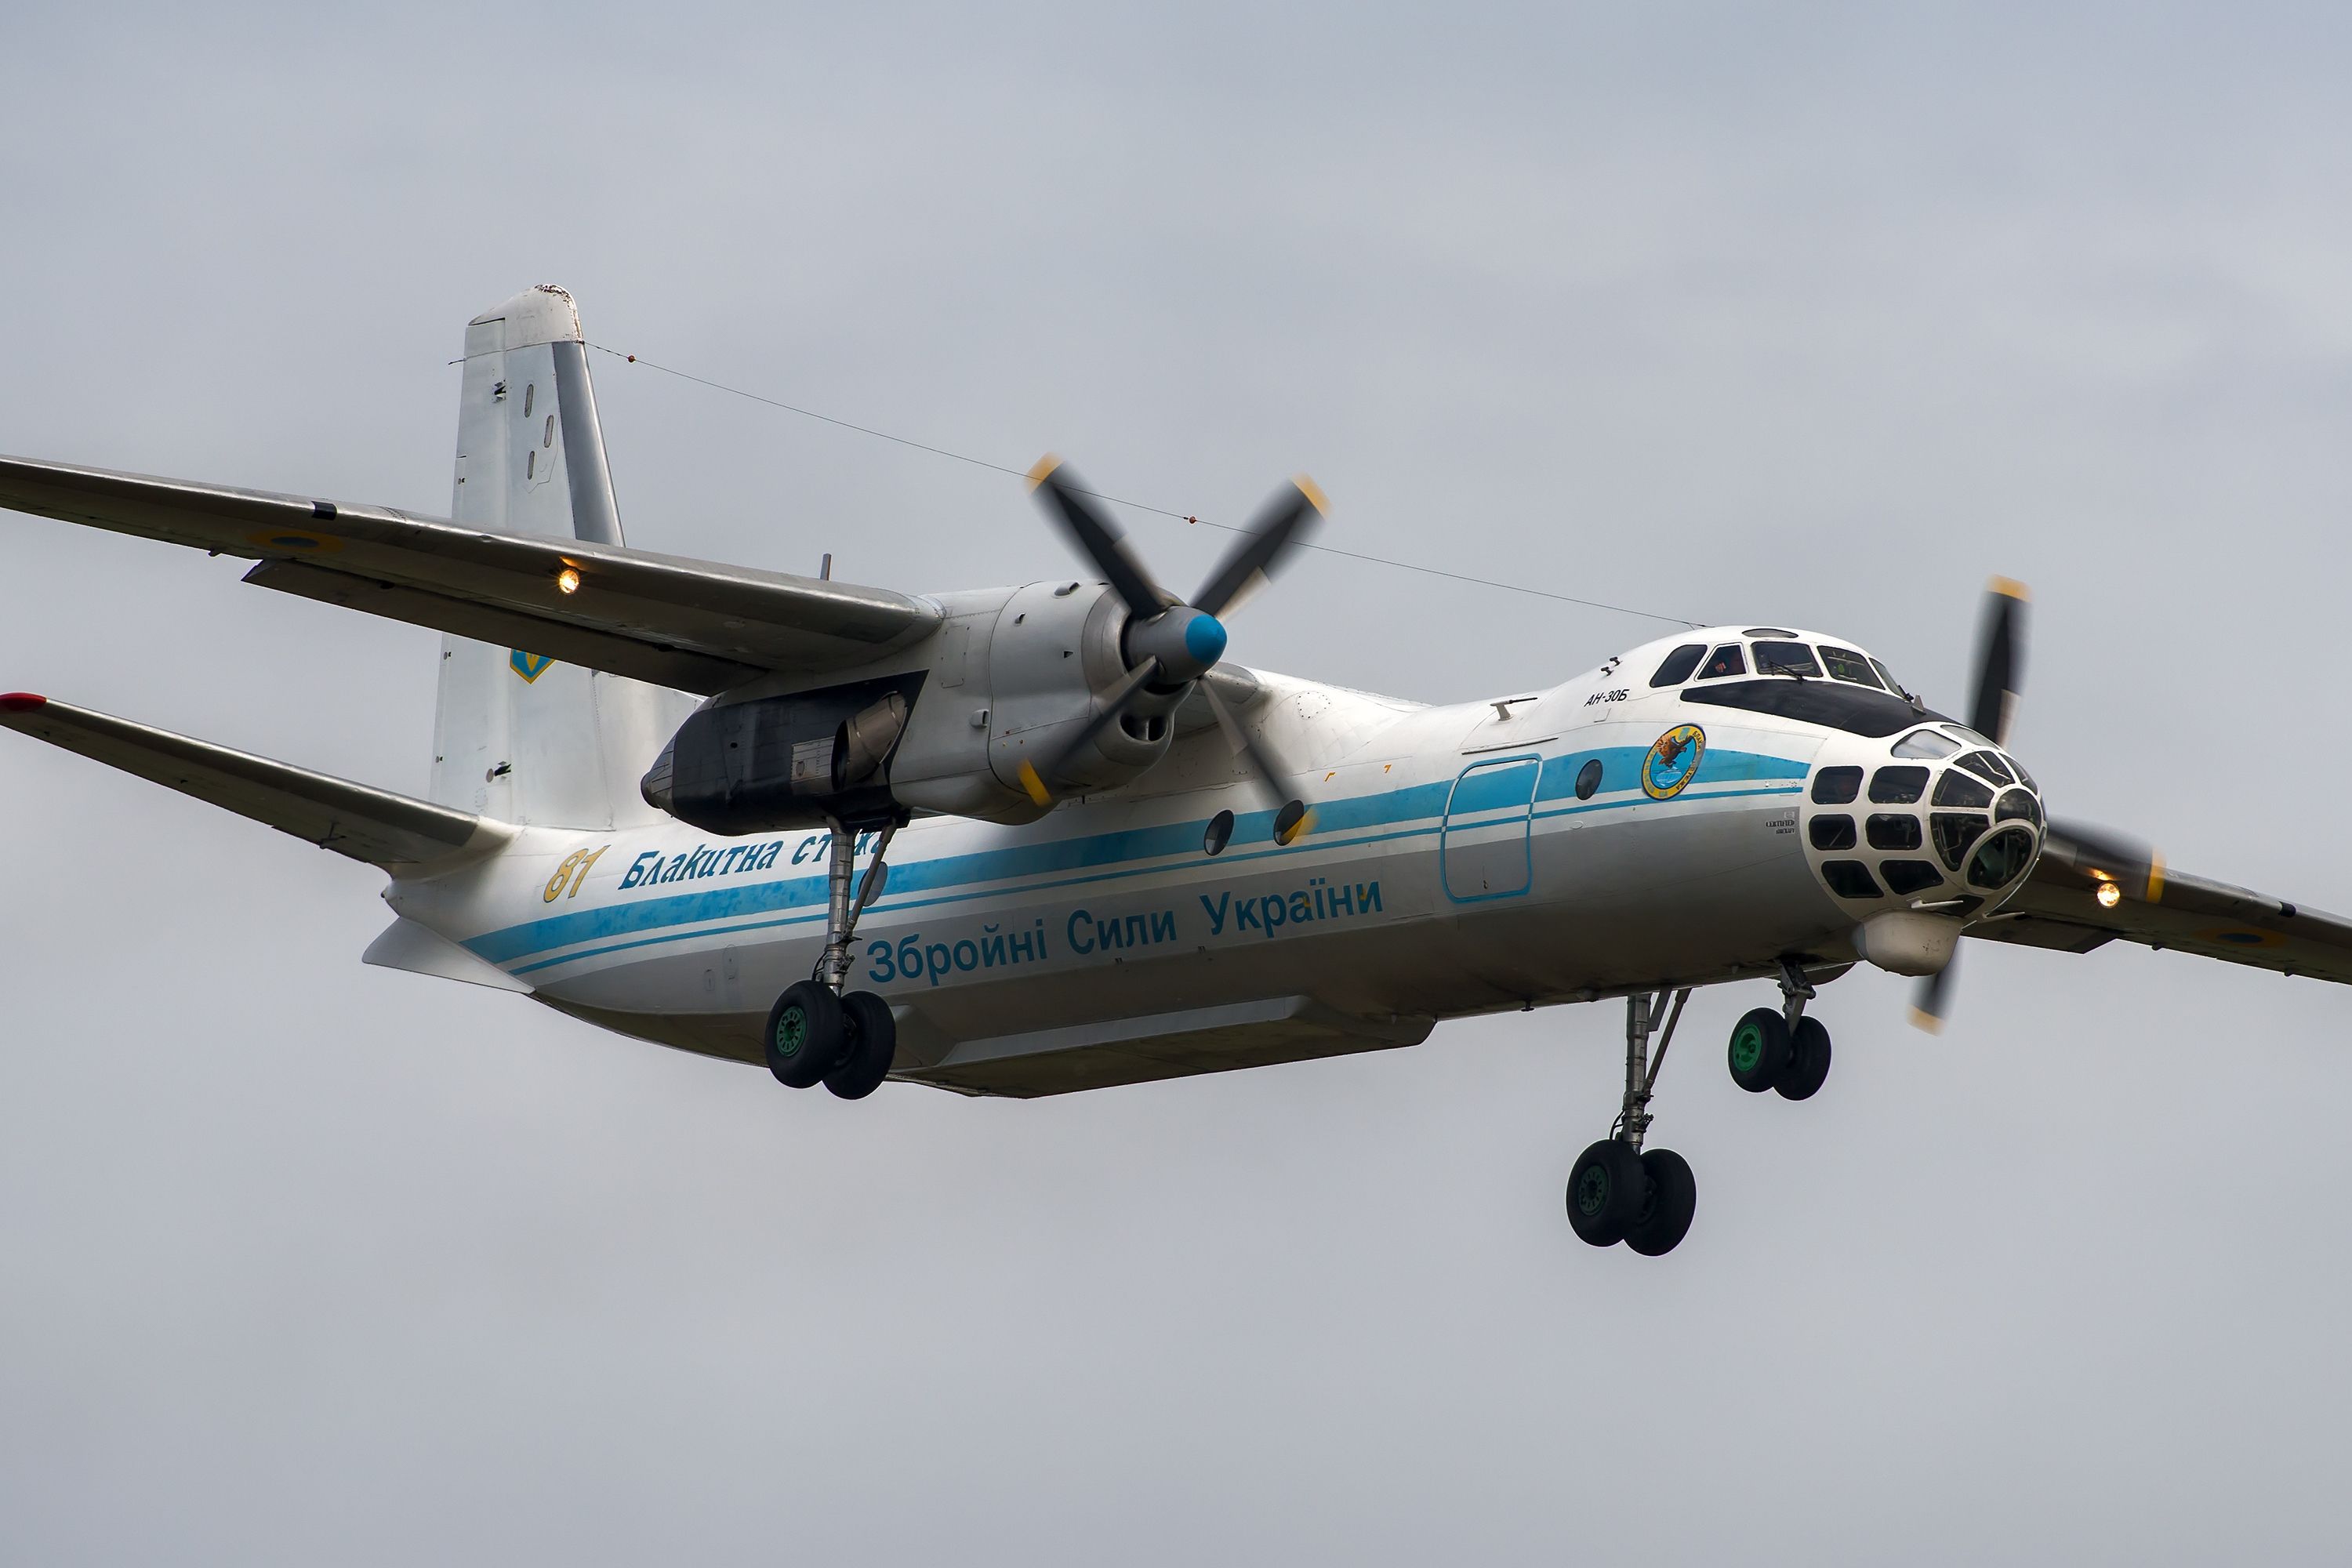 The Ukranian Antonov An-30, a cartography aircraft used in Open Skies missions.